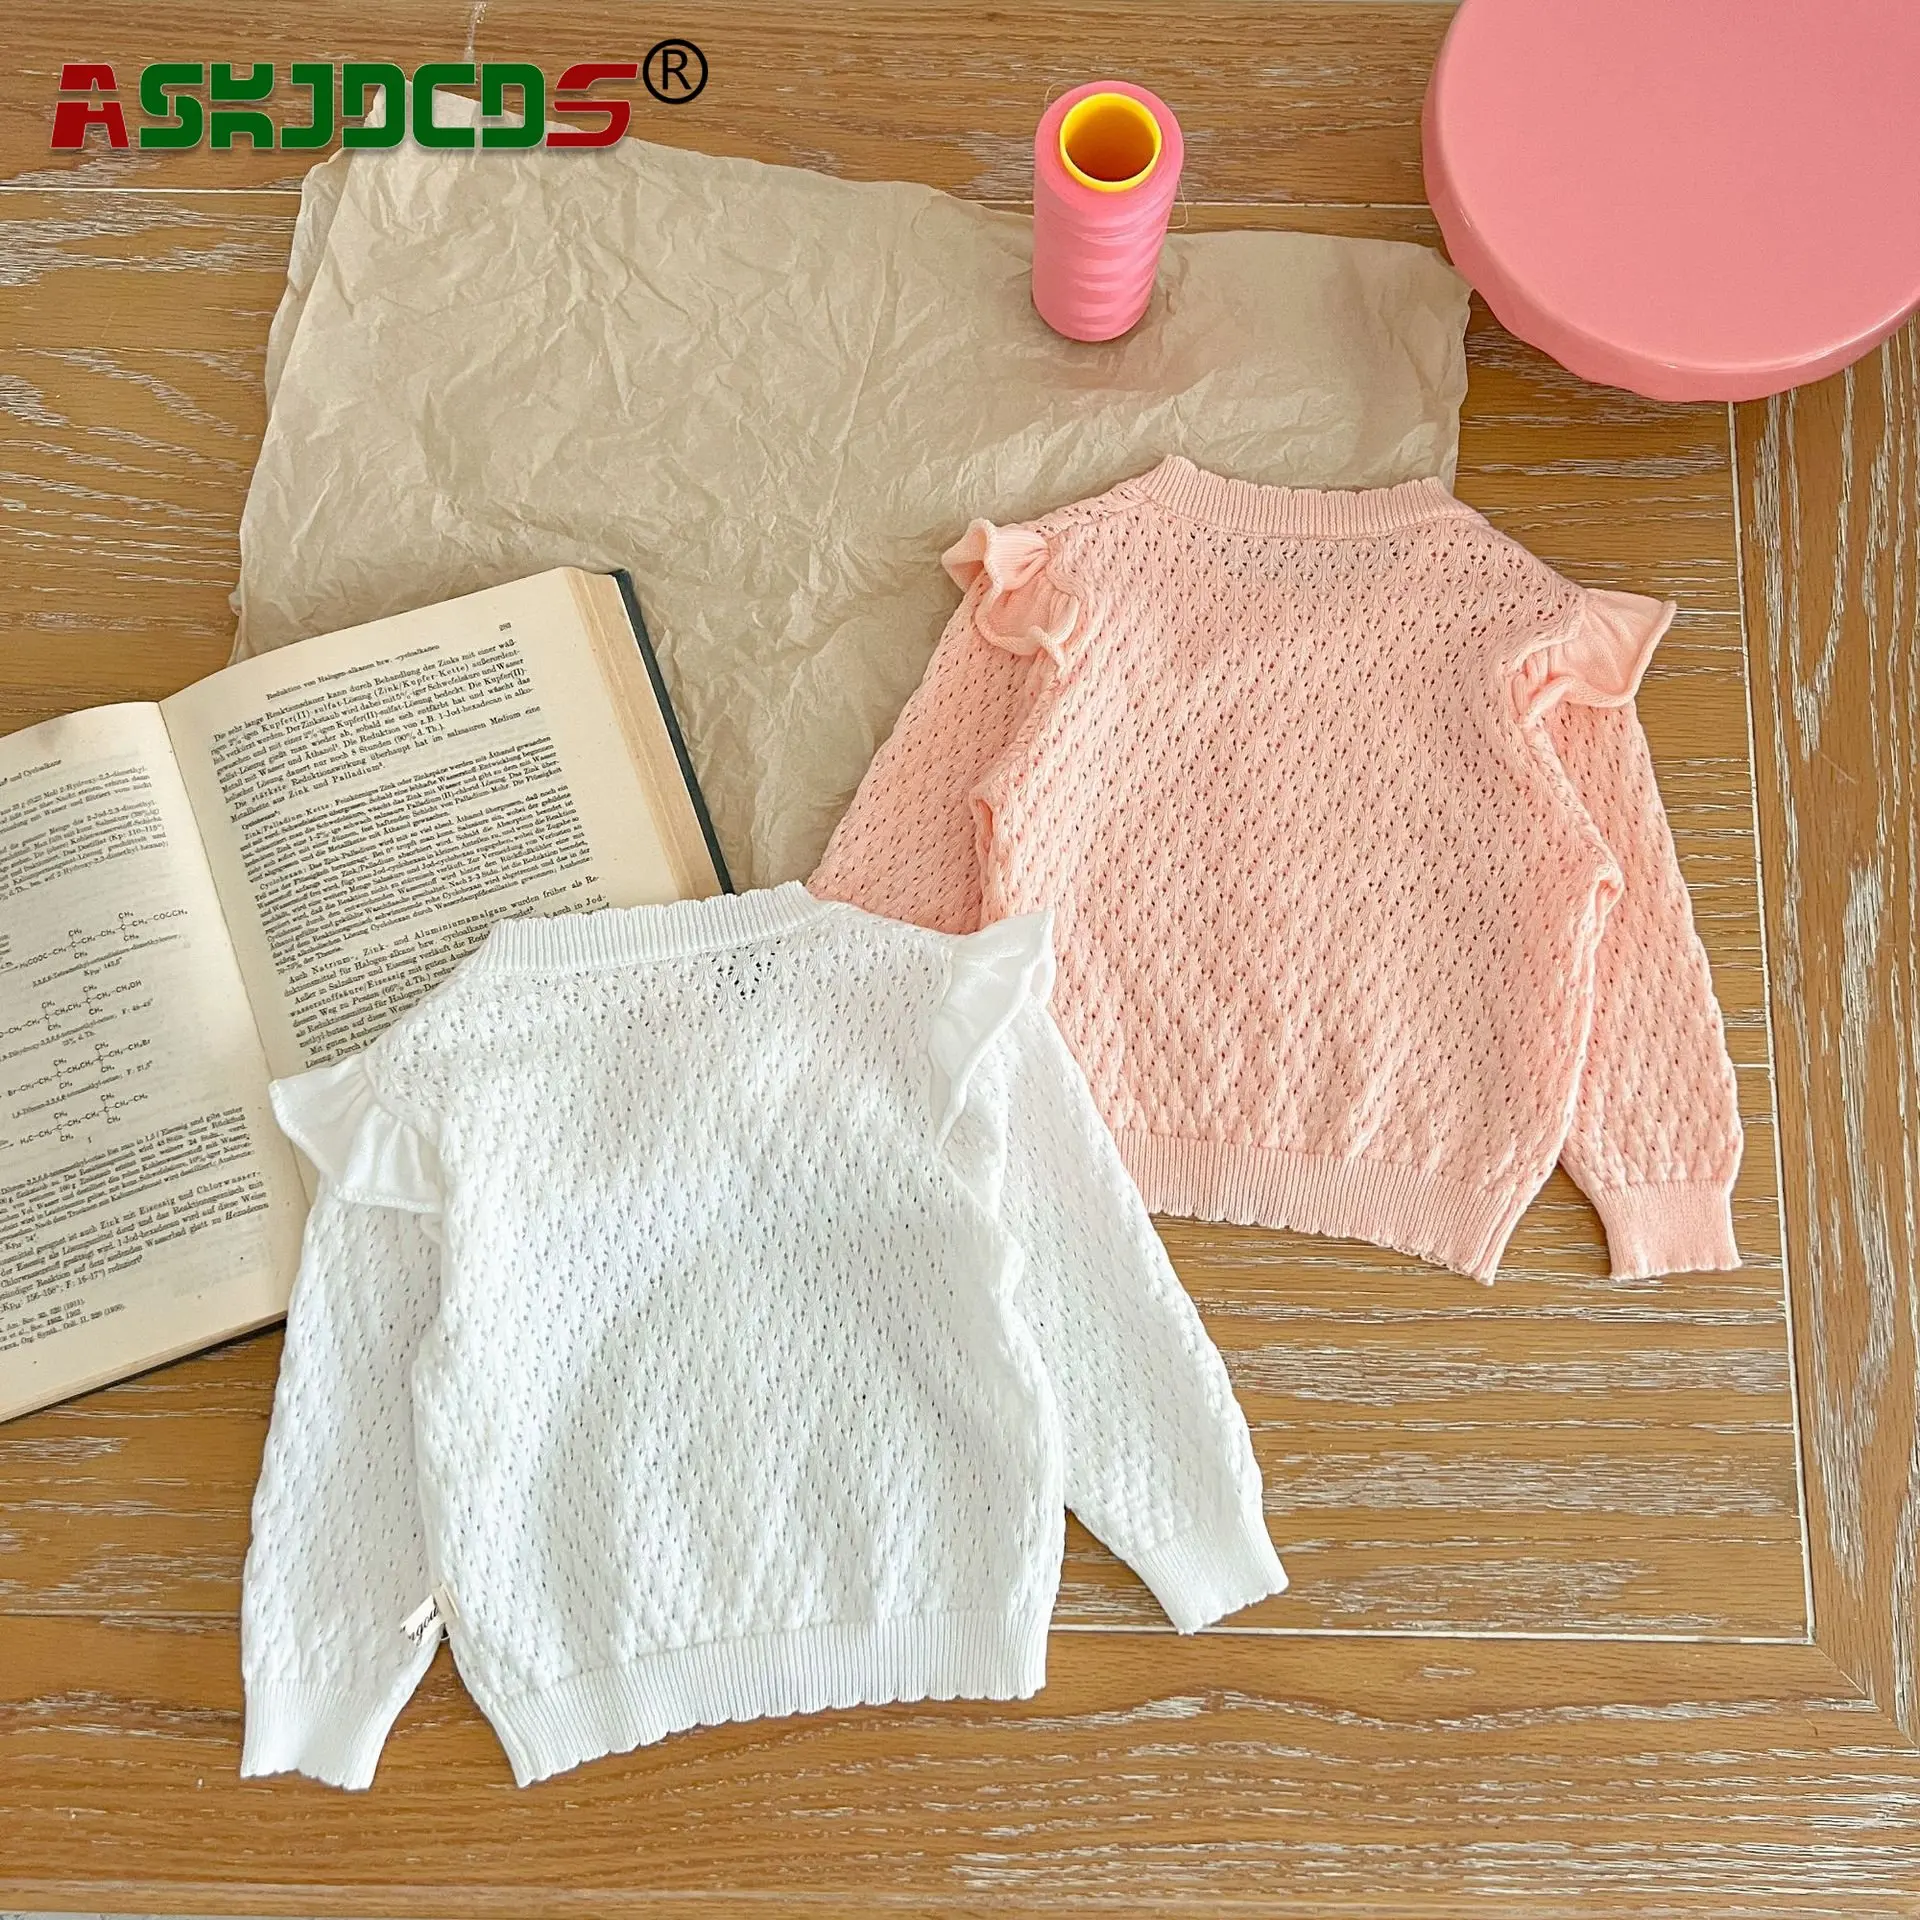 

Knitting ruched Coat 0-3Y Baby Girls Fashion Breathable Cardigan Sweater Perfect for Sun Protection Air-Conditioning Beautiful